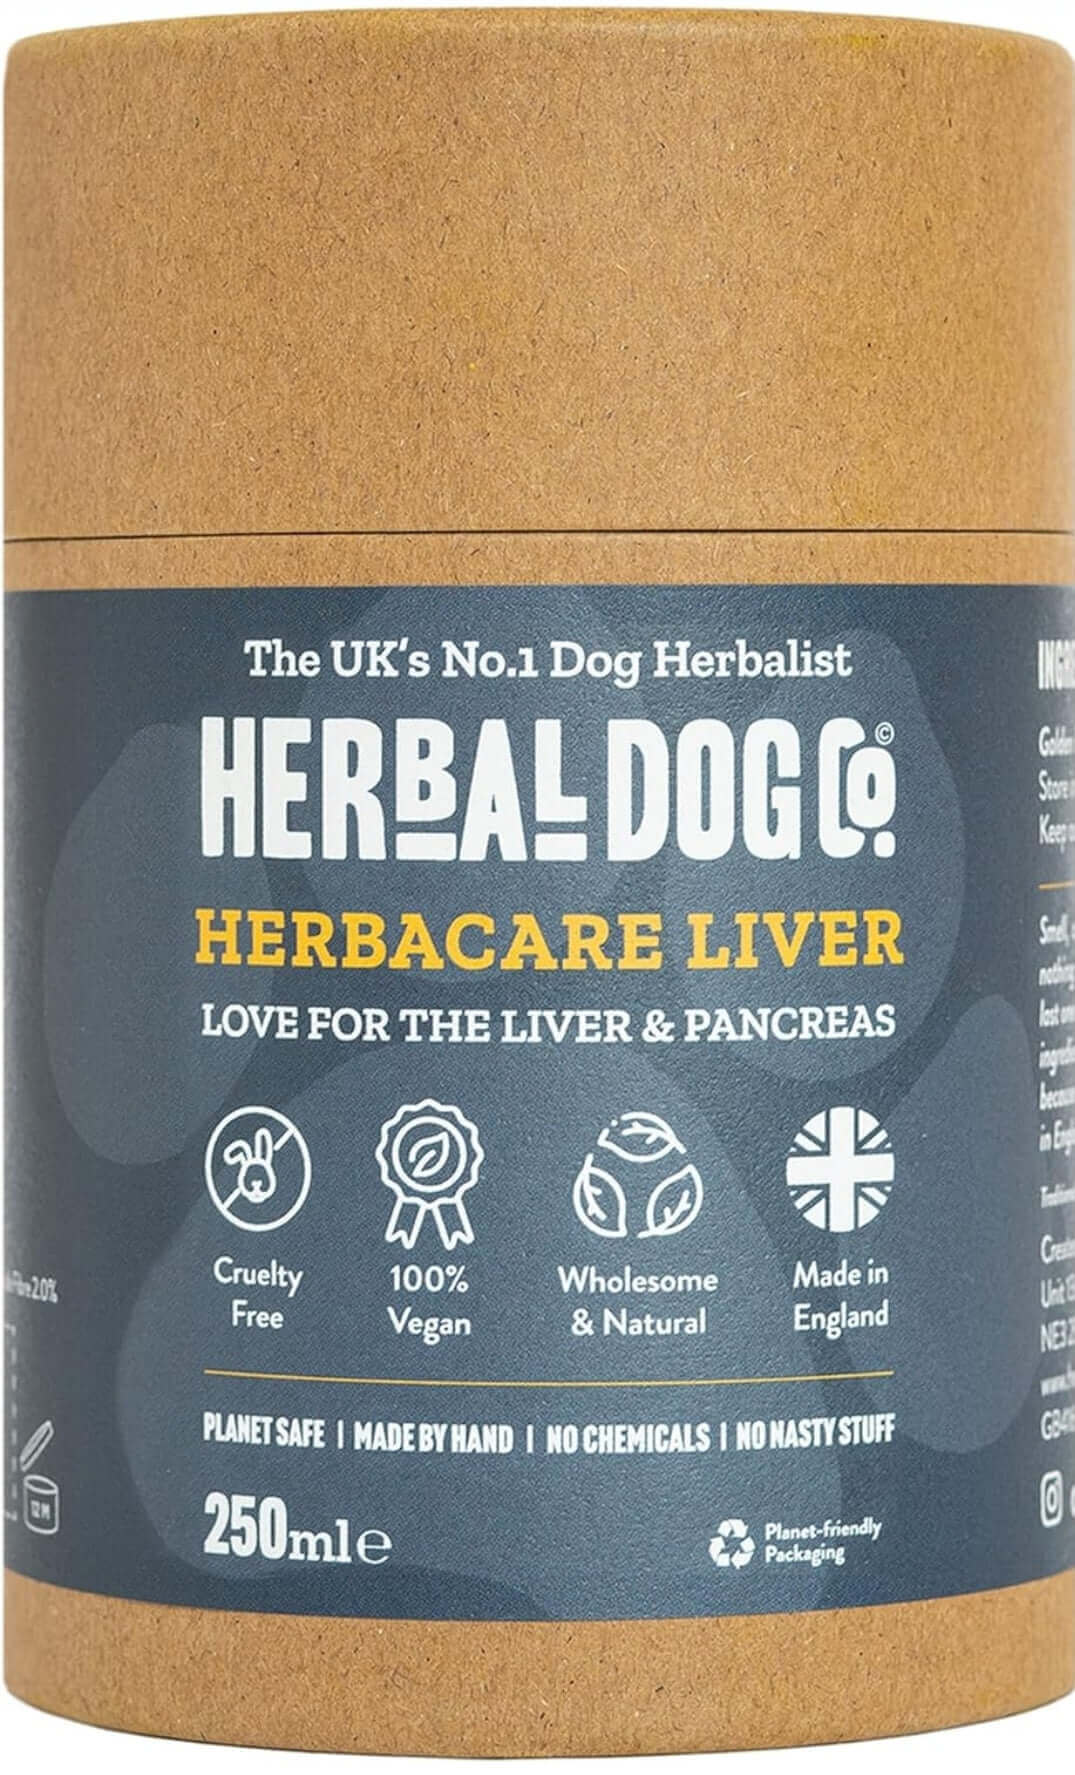 Herbal dog co Natural liver supplement for dogs